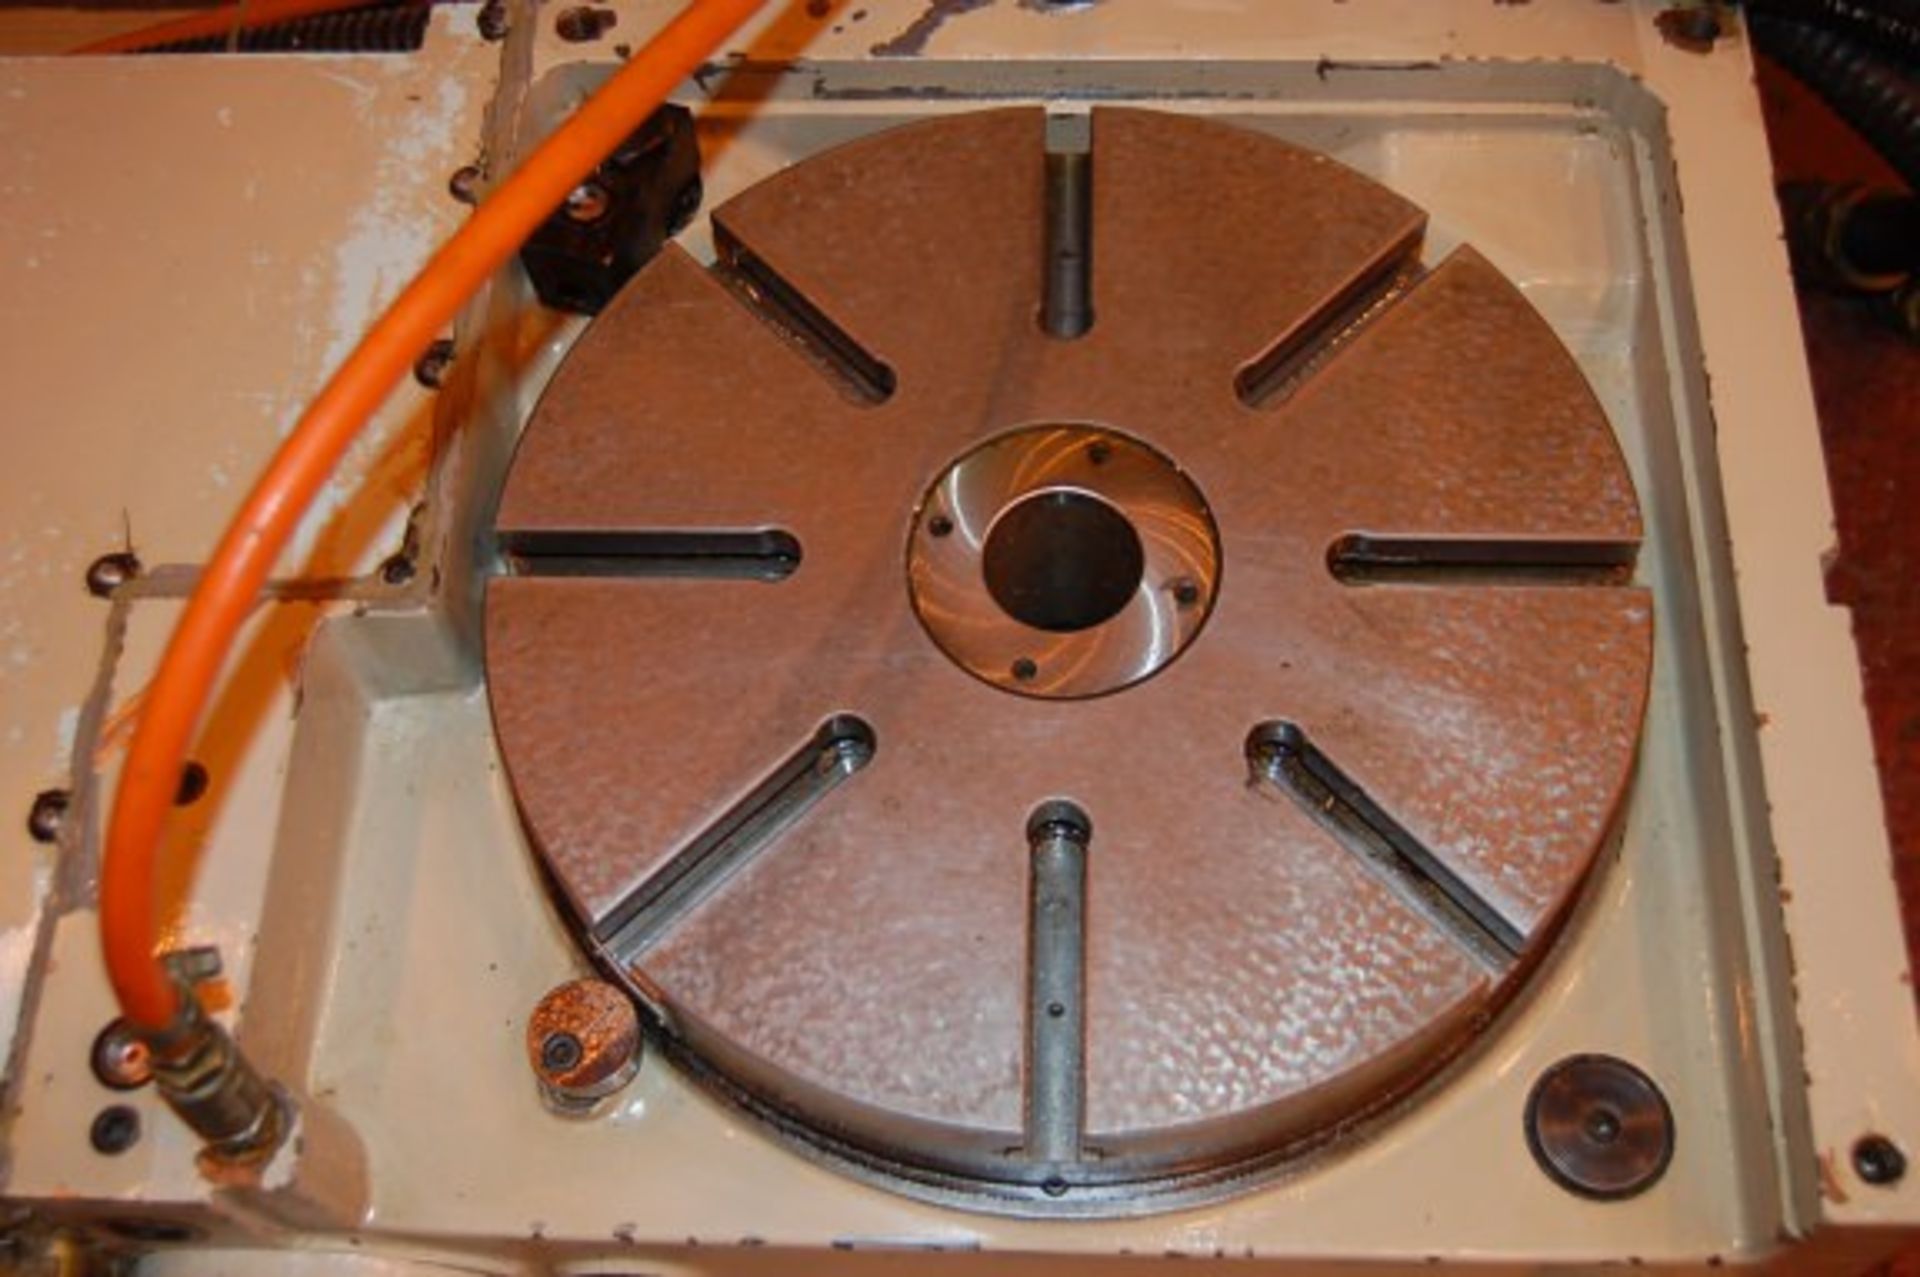 12.5" MITSUI SEIKI NCT-320I CNC PROGRAMMABLE 4TH-AXIS ROTARY TABLE - Image 4 of 5